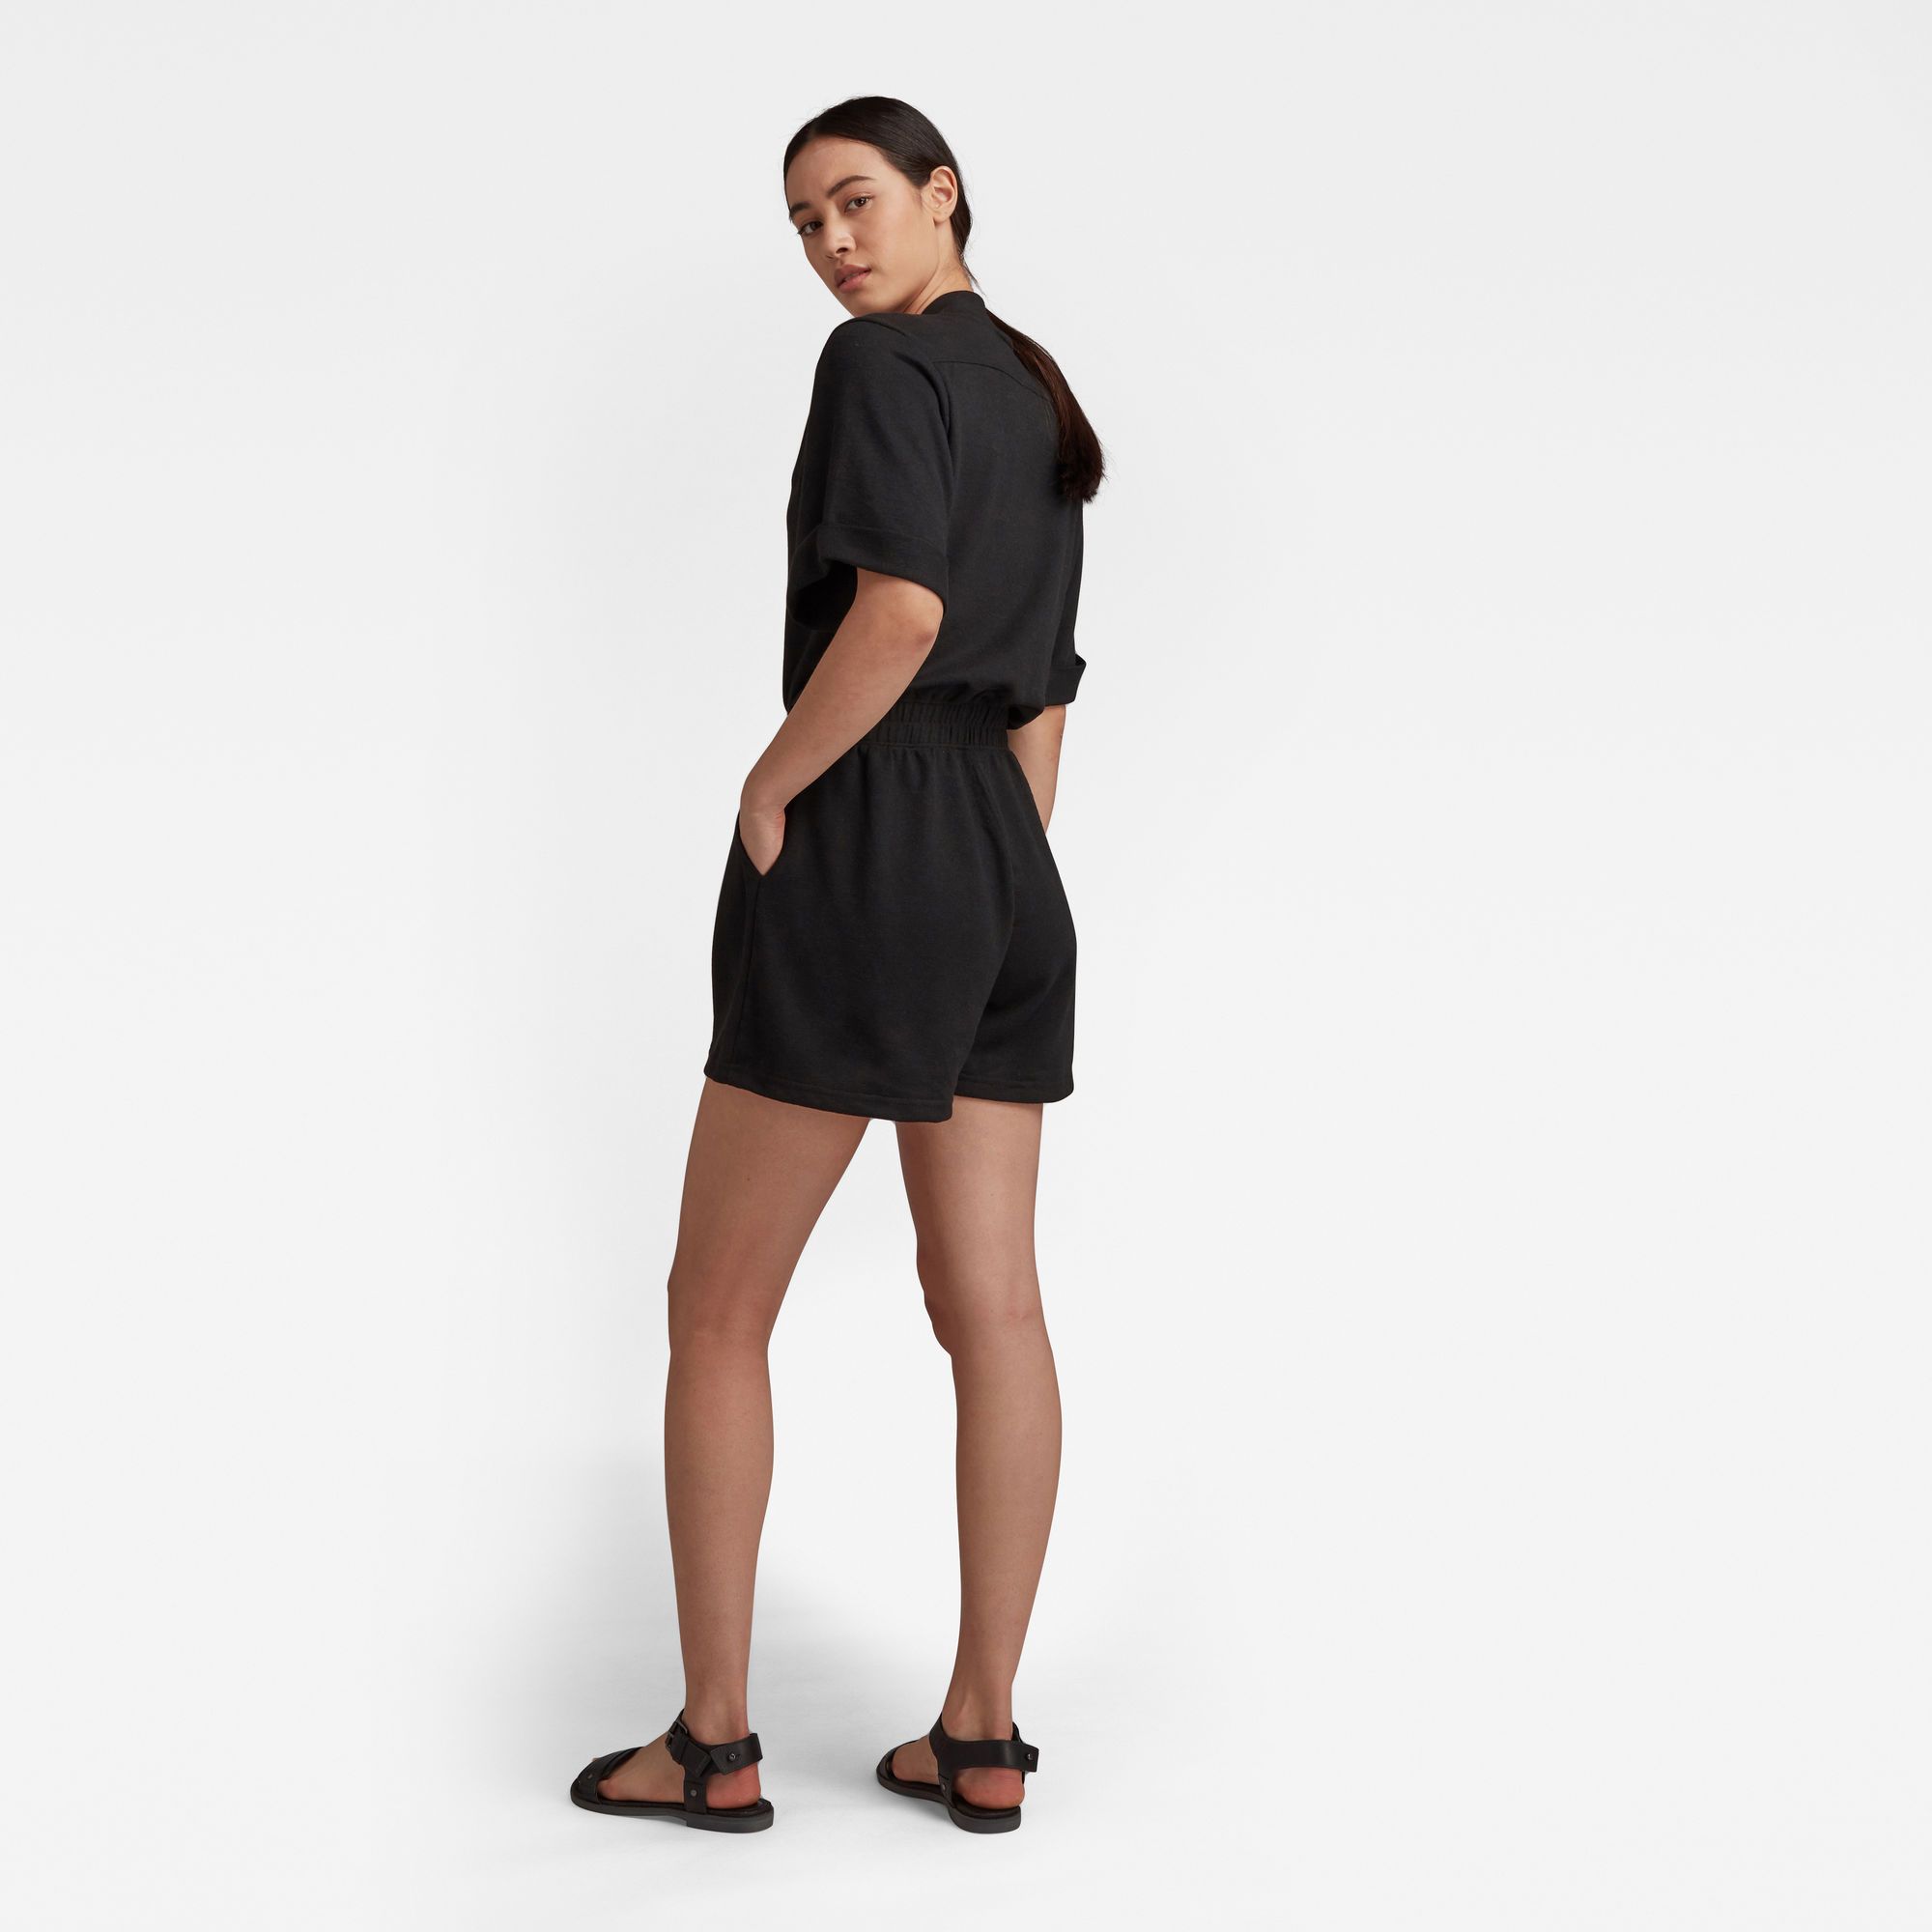 V-shaped neckline- raised ribbed neckline at the back. Short sleeves, folded edge- tucked. Elasticated waist. Upper leg length shorts. Slanted front pockets. Zipper closure- pull tab. Zip closure. Mid waist. This jersey is created out of recycled polyester and linen, creating in interest in texture and color blend. jersey knit. Loose